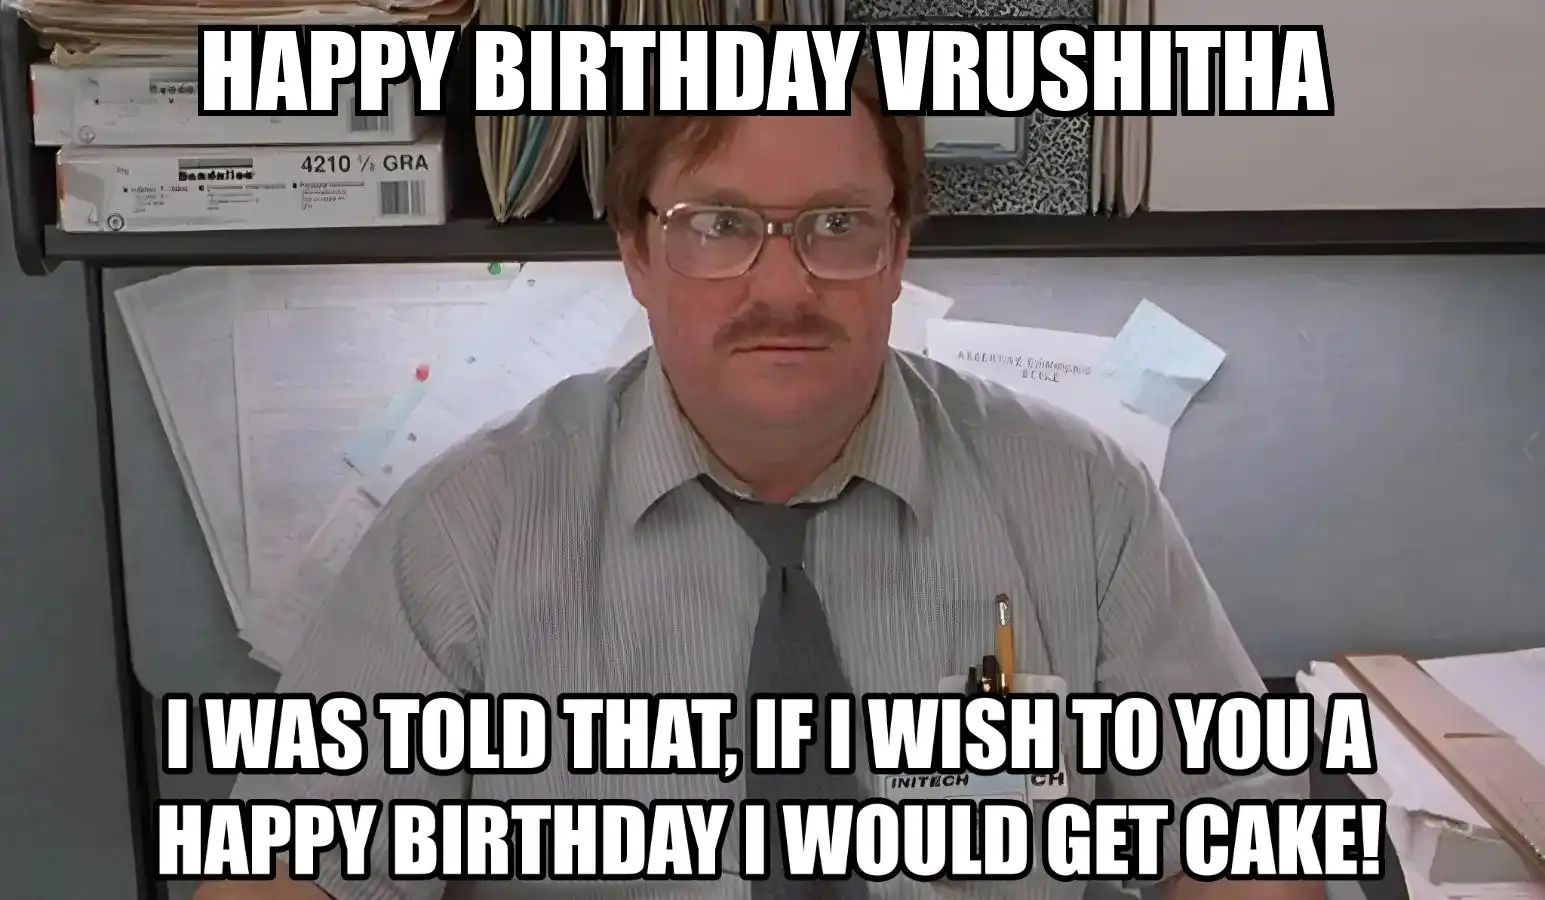 Happy Birthday Vrushitha I Would Get A Cake Meme